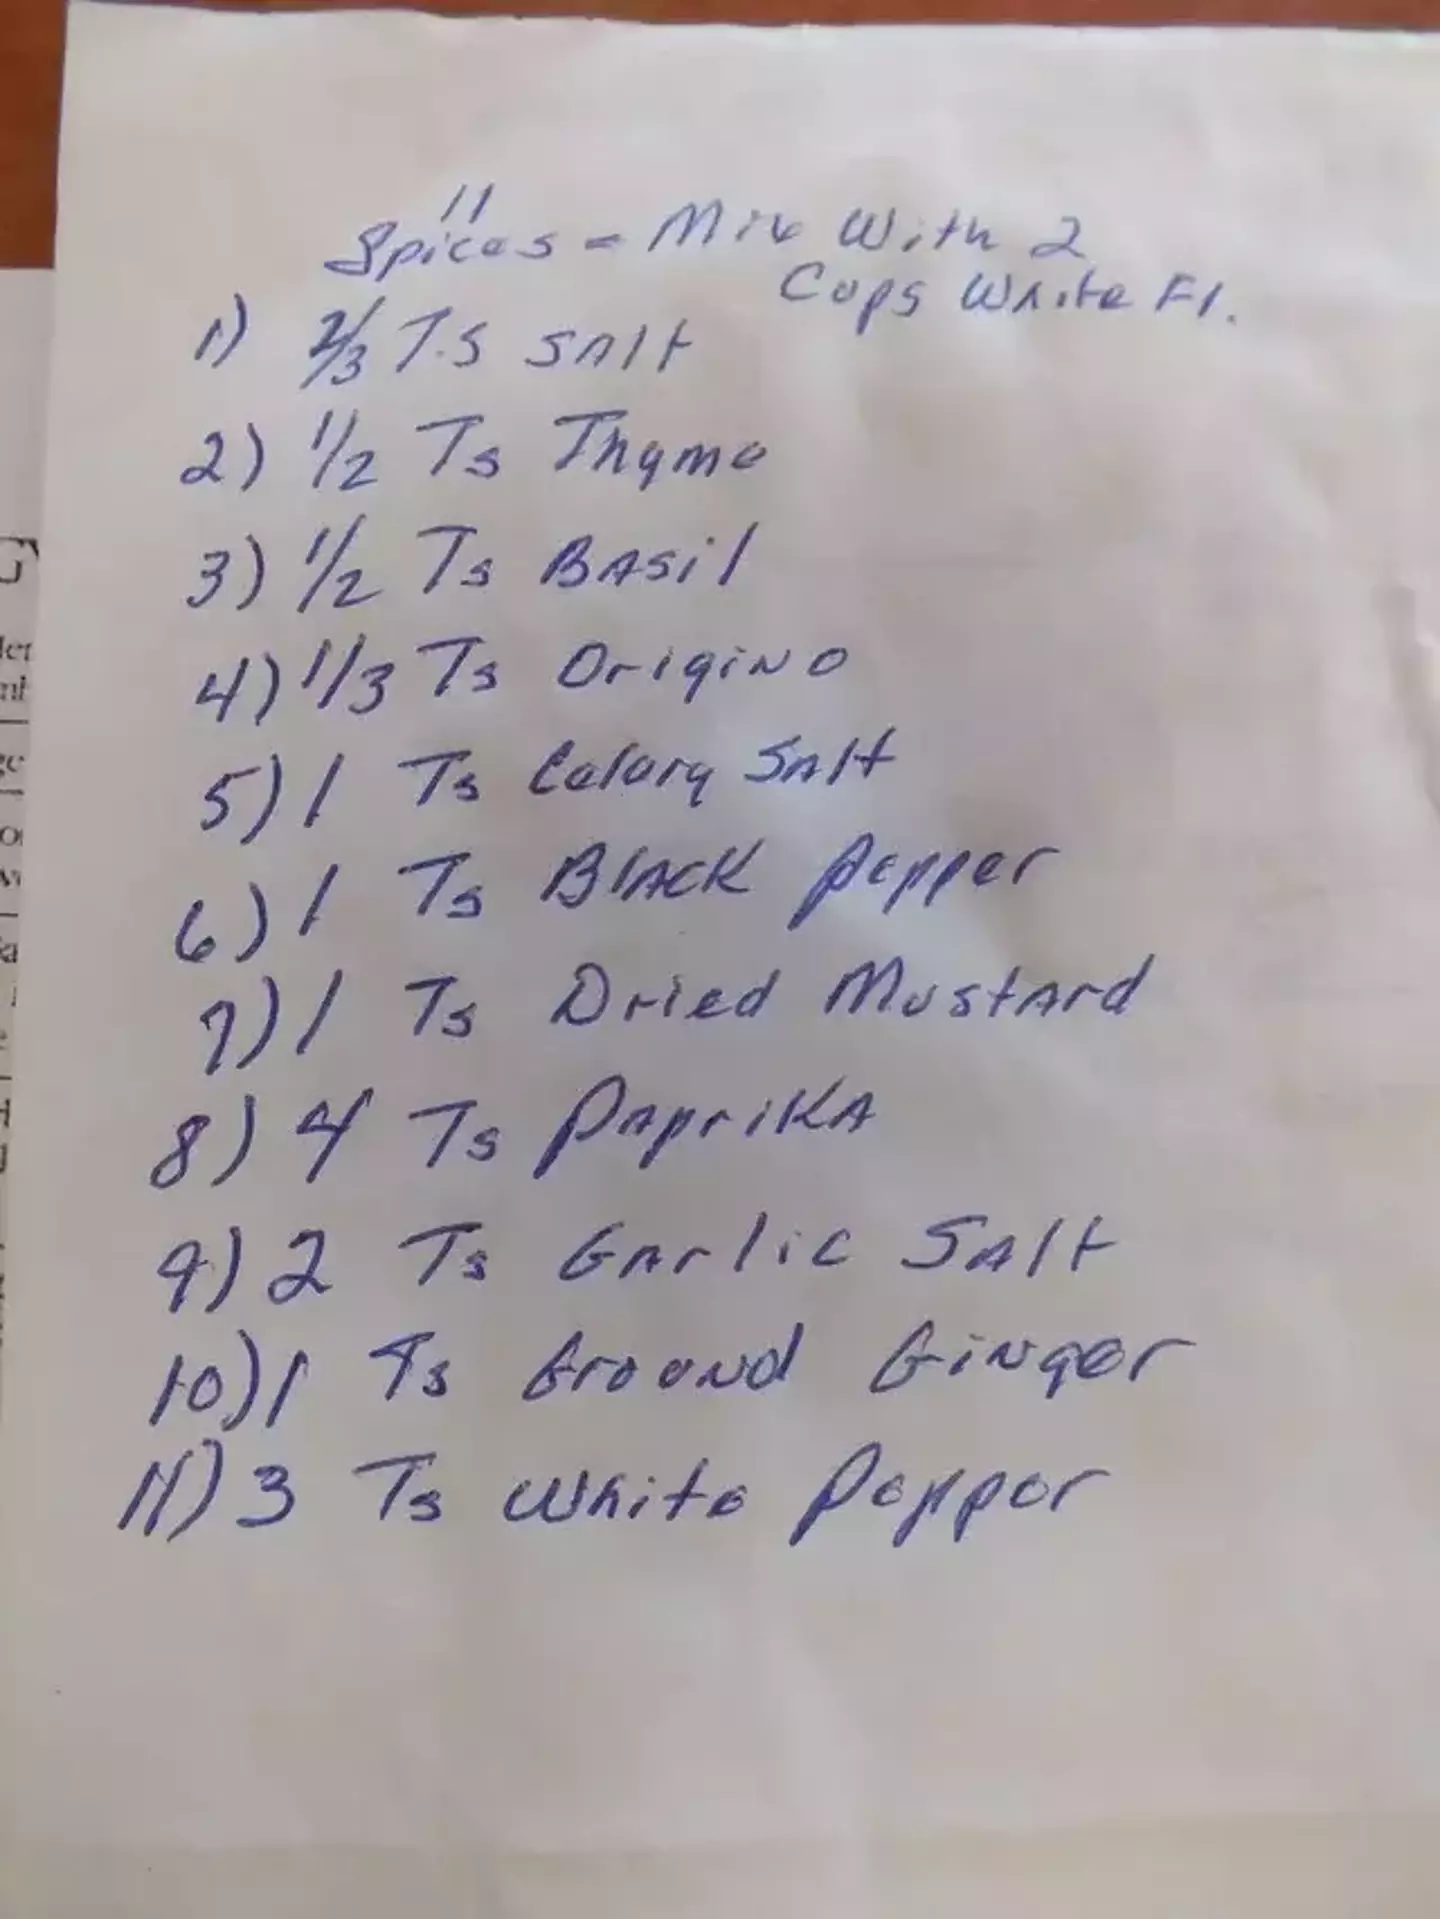 The KFC recipe was found on the back of a will.